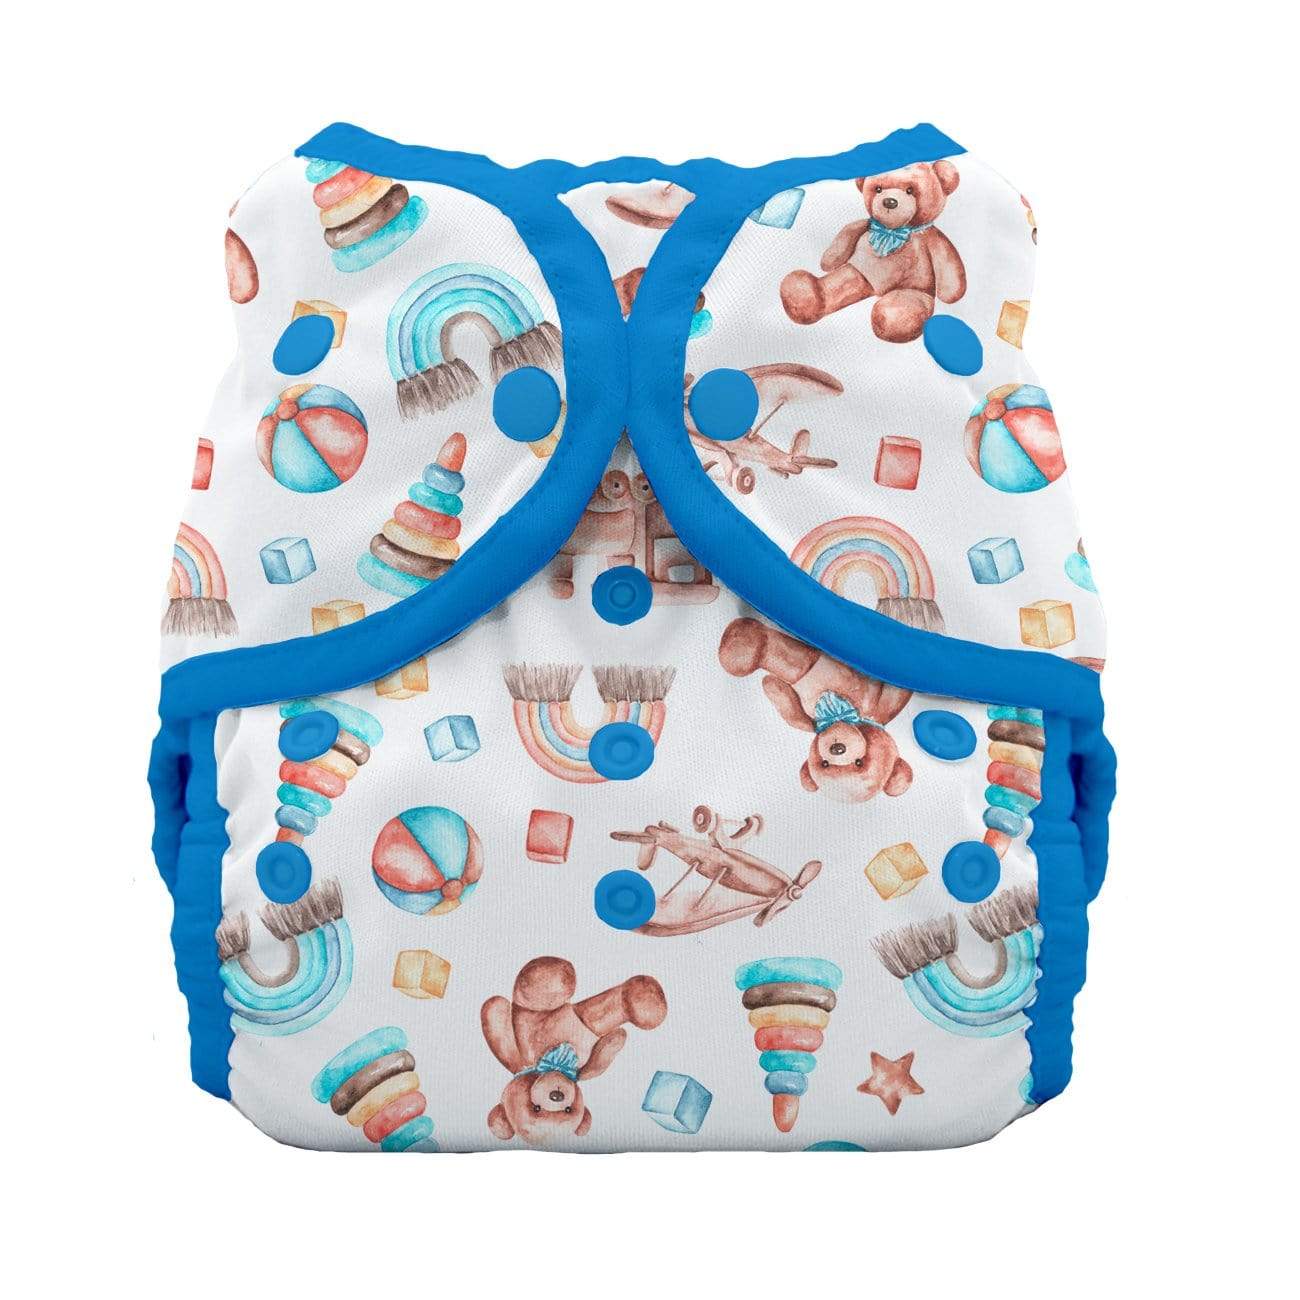 Reusable Nappies - Eco Friendly and Chemical Free Cloth Nappies - Includes  6 Washable Baby Diapers, 6 Bamboo Nappy Inserts, 1 Roll of Biodegradable  Nappy Liner, Wet Bag : : Baby Products